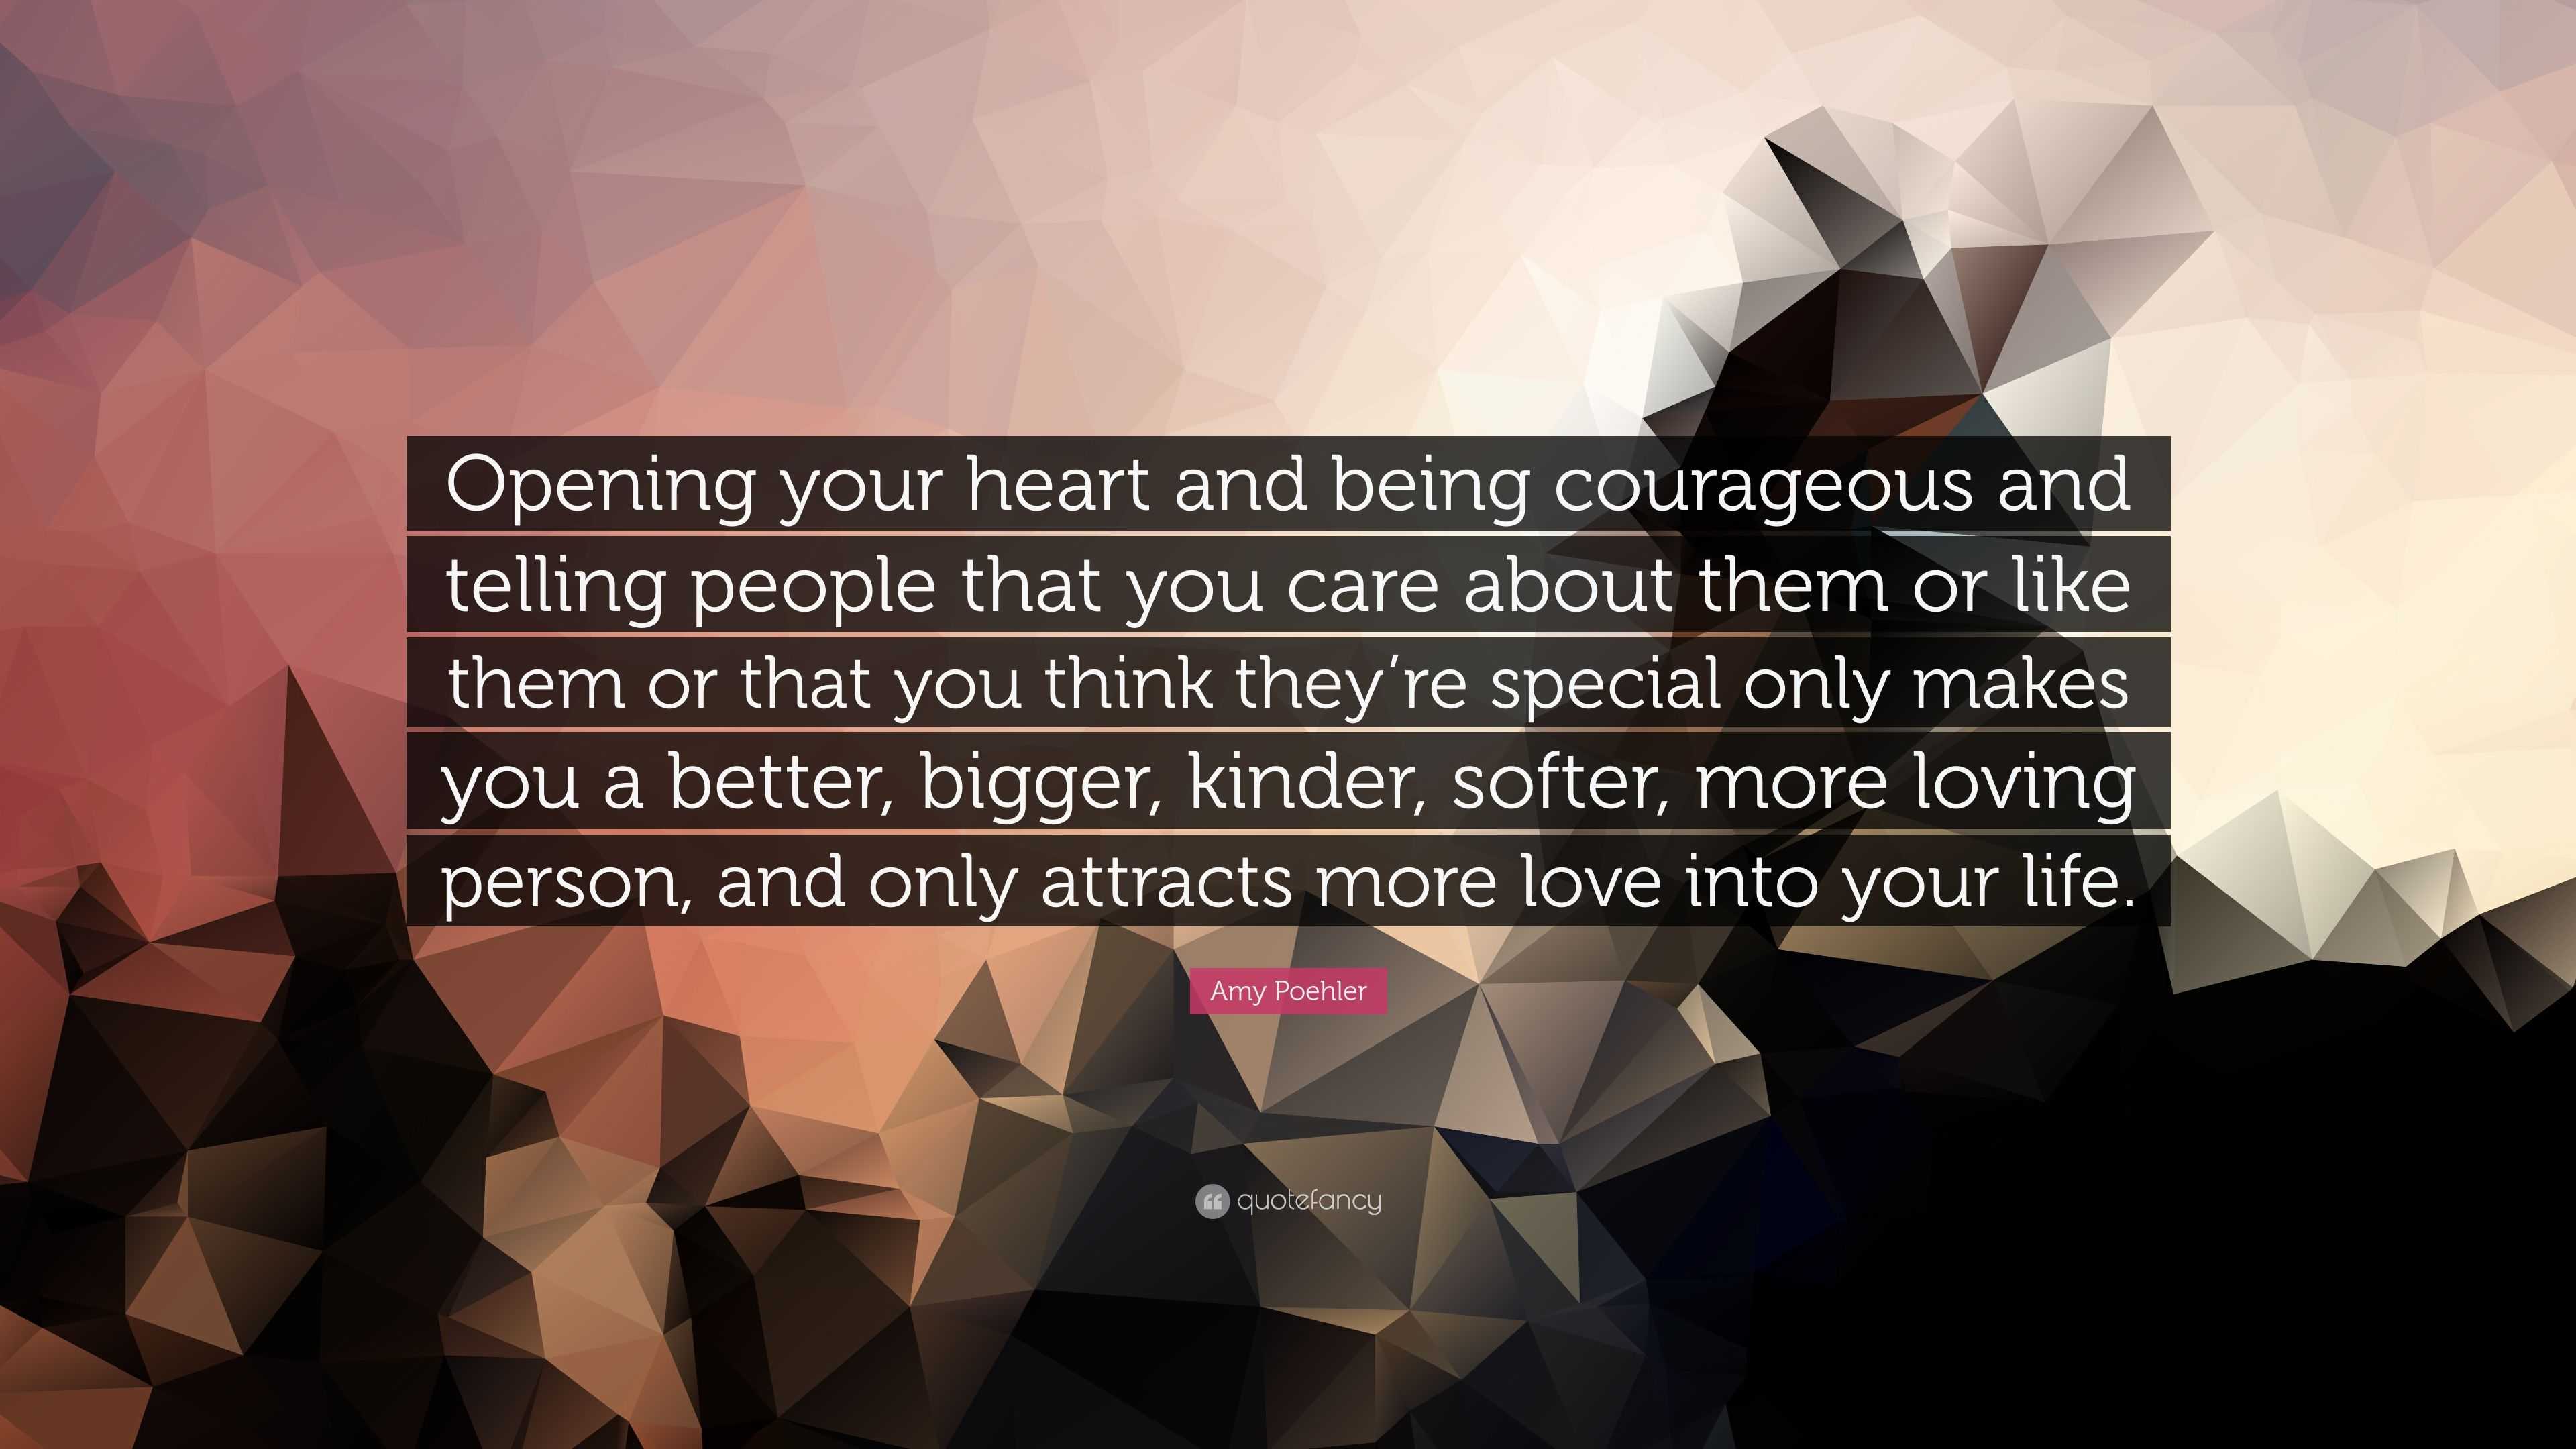 Amy Poehler Quote “Opening your heart and being courageous and telling people that you